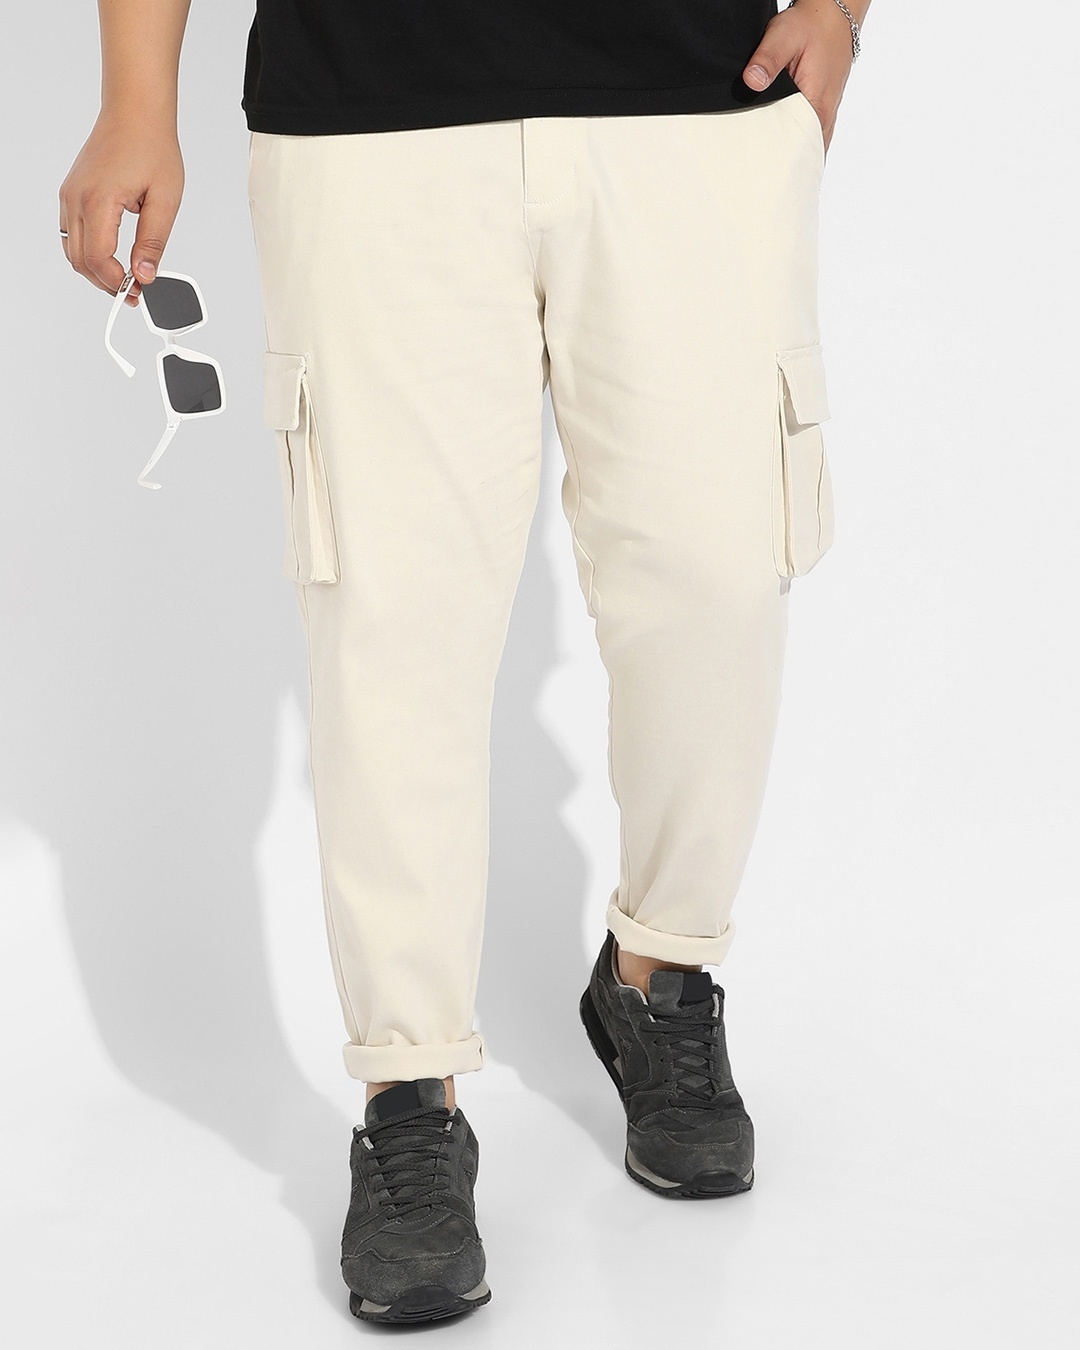 Buy Mens Cargo Work Pant, F_Gotal Big & Tall Plus Size Hip Hop Elastic  Waist Sports Running Jogger Outdoors Pants Trouser at Amazon.in